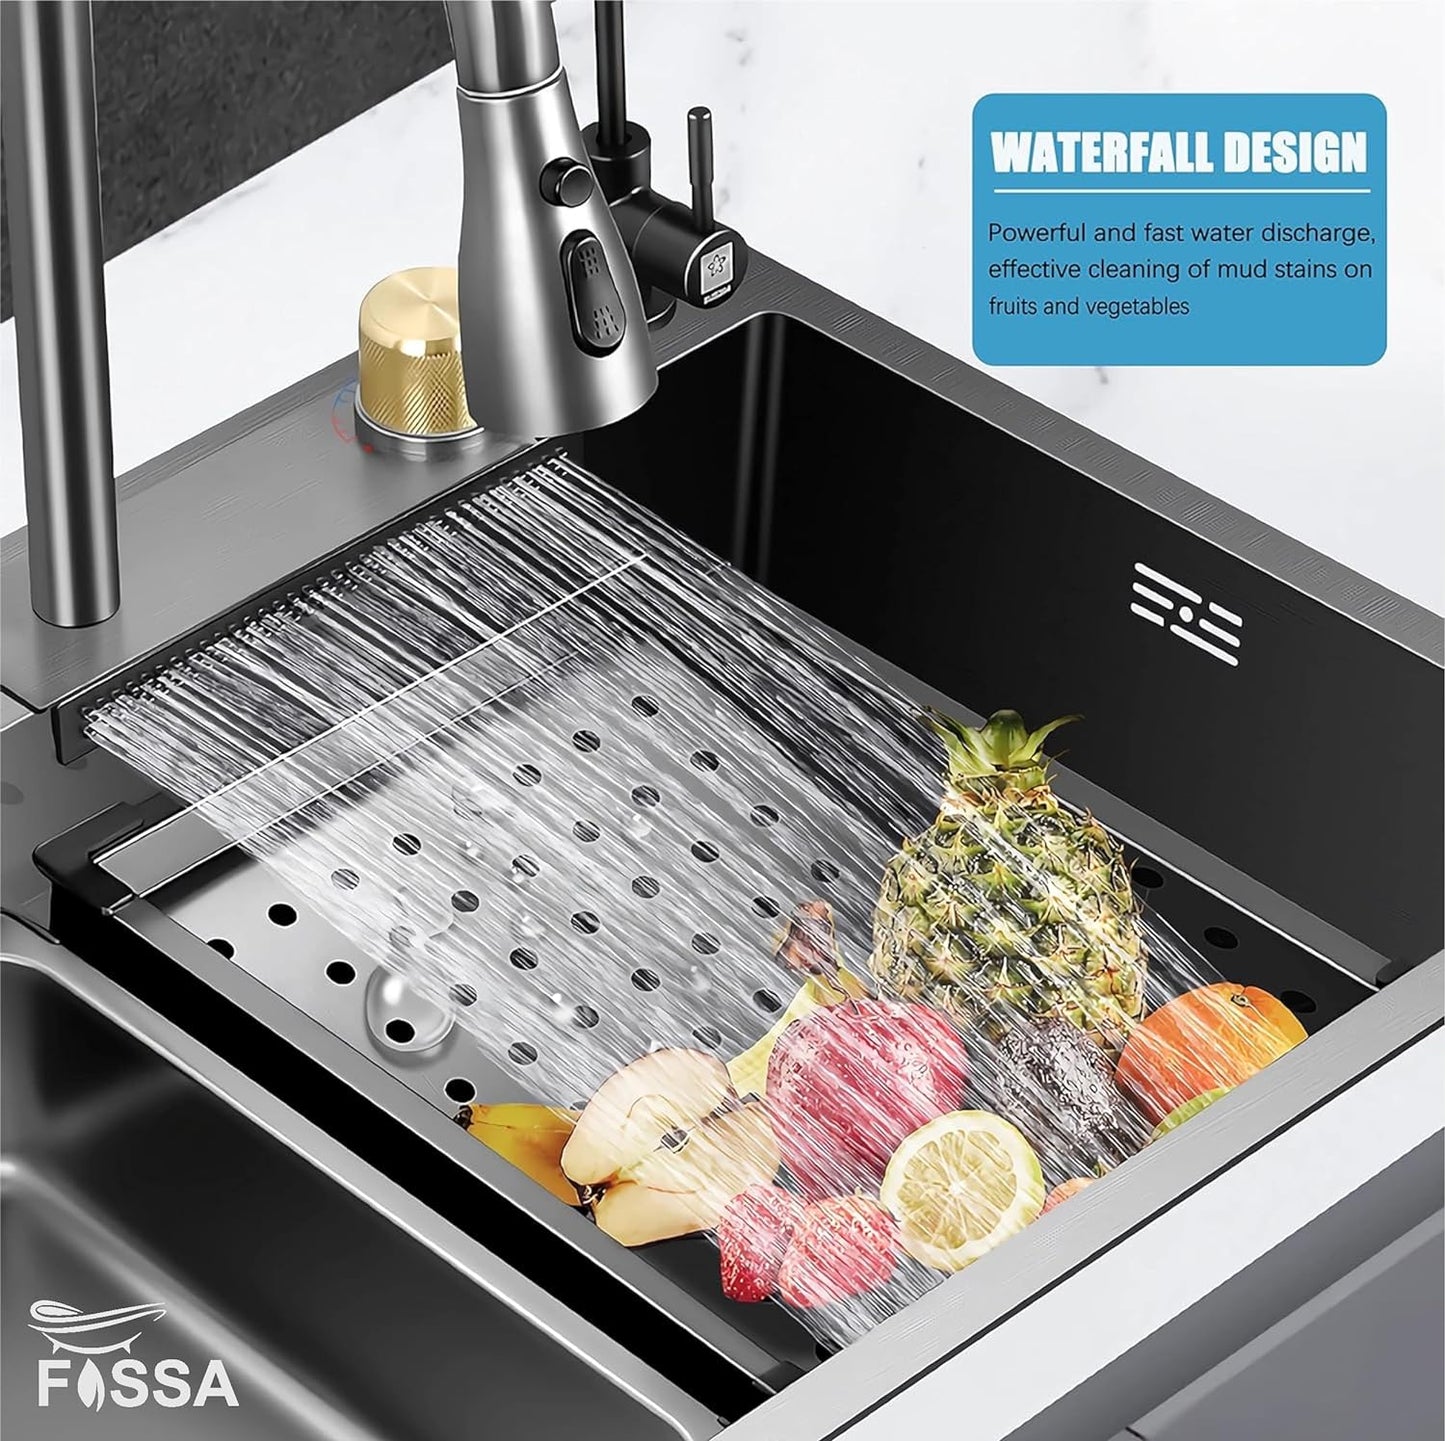 Fossa 27"x18" Single Bowl Waterfall Kitchen Sink Honeycomb Embossed Sink with White Nano Coating, Stainless Steel, Rectangular Workstation, faucet With all Accessories.